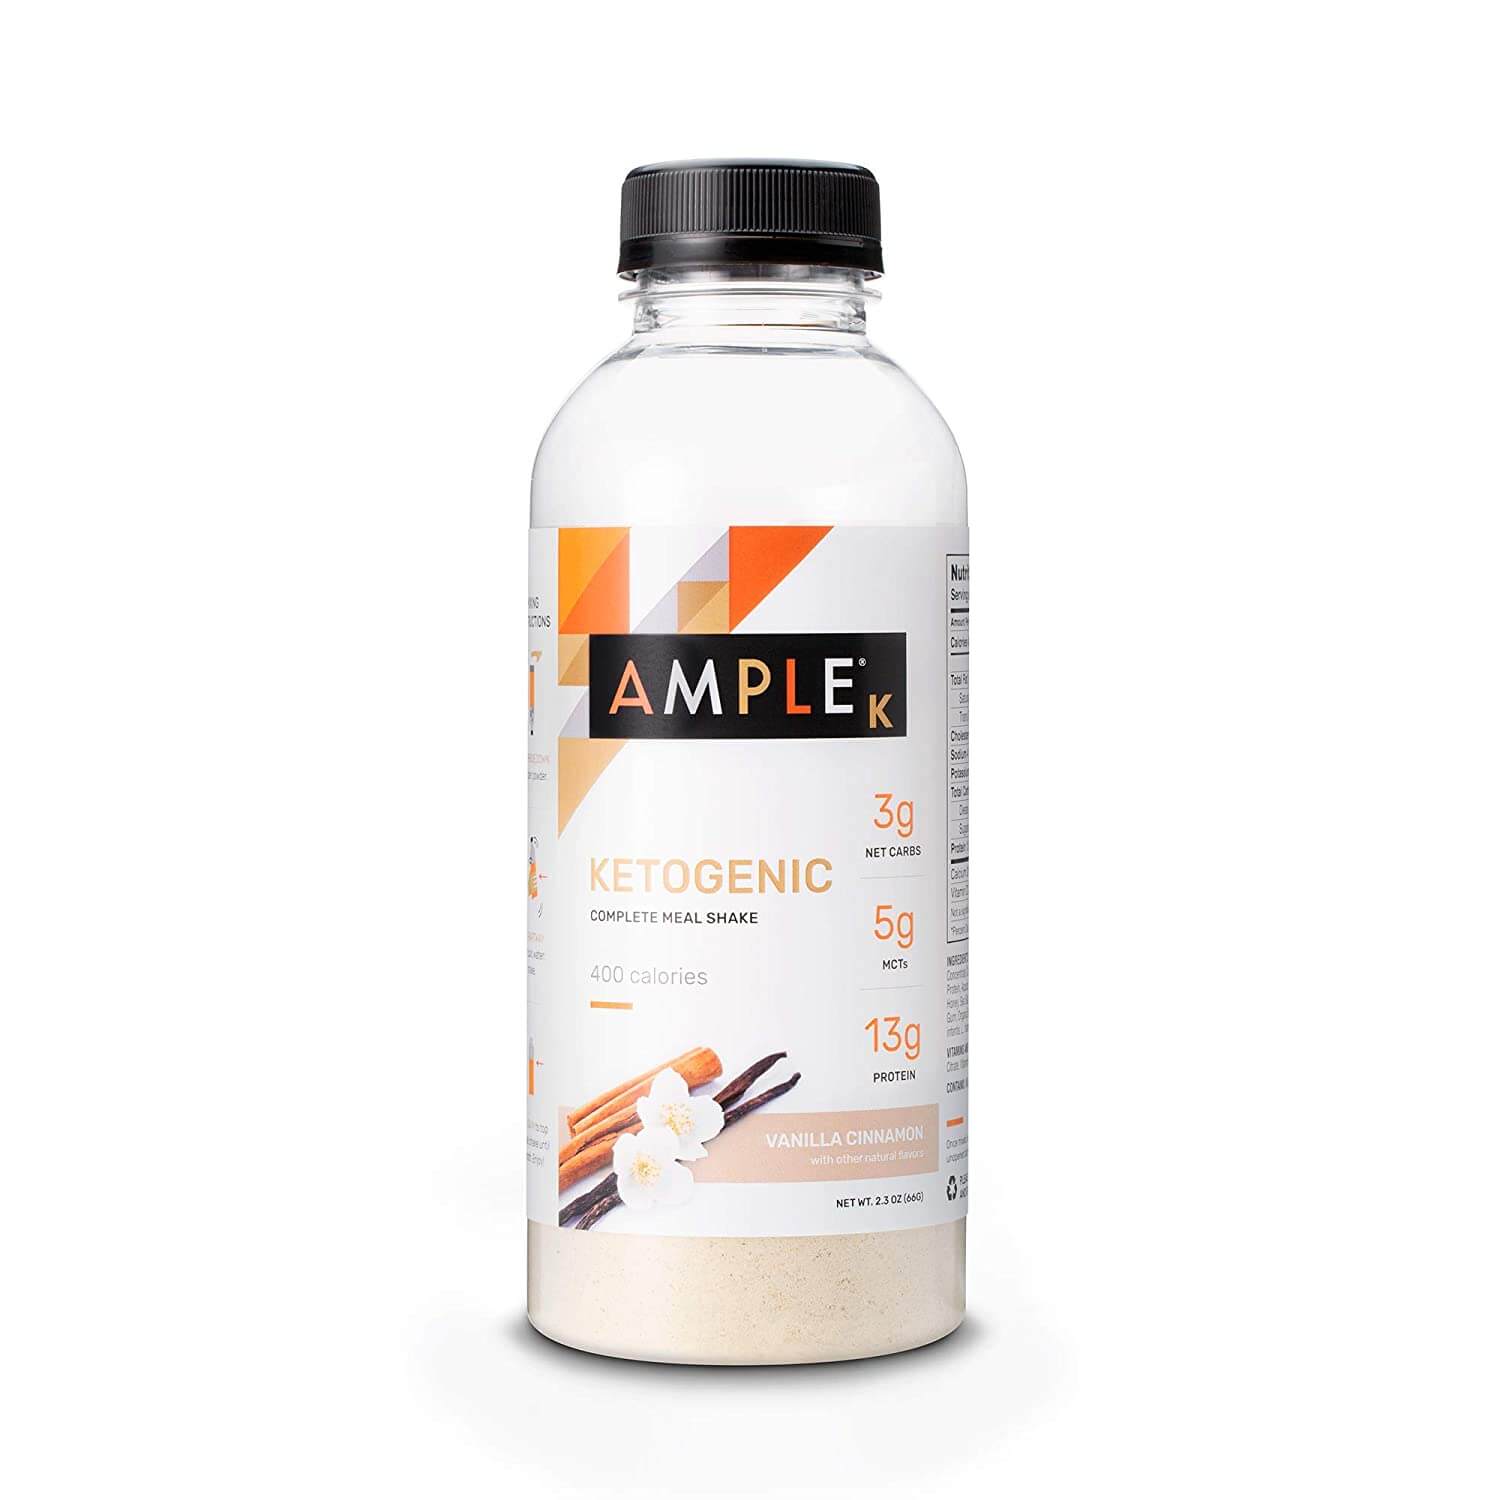 Ample K Ketogenic Meal Replacement Shake